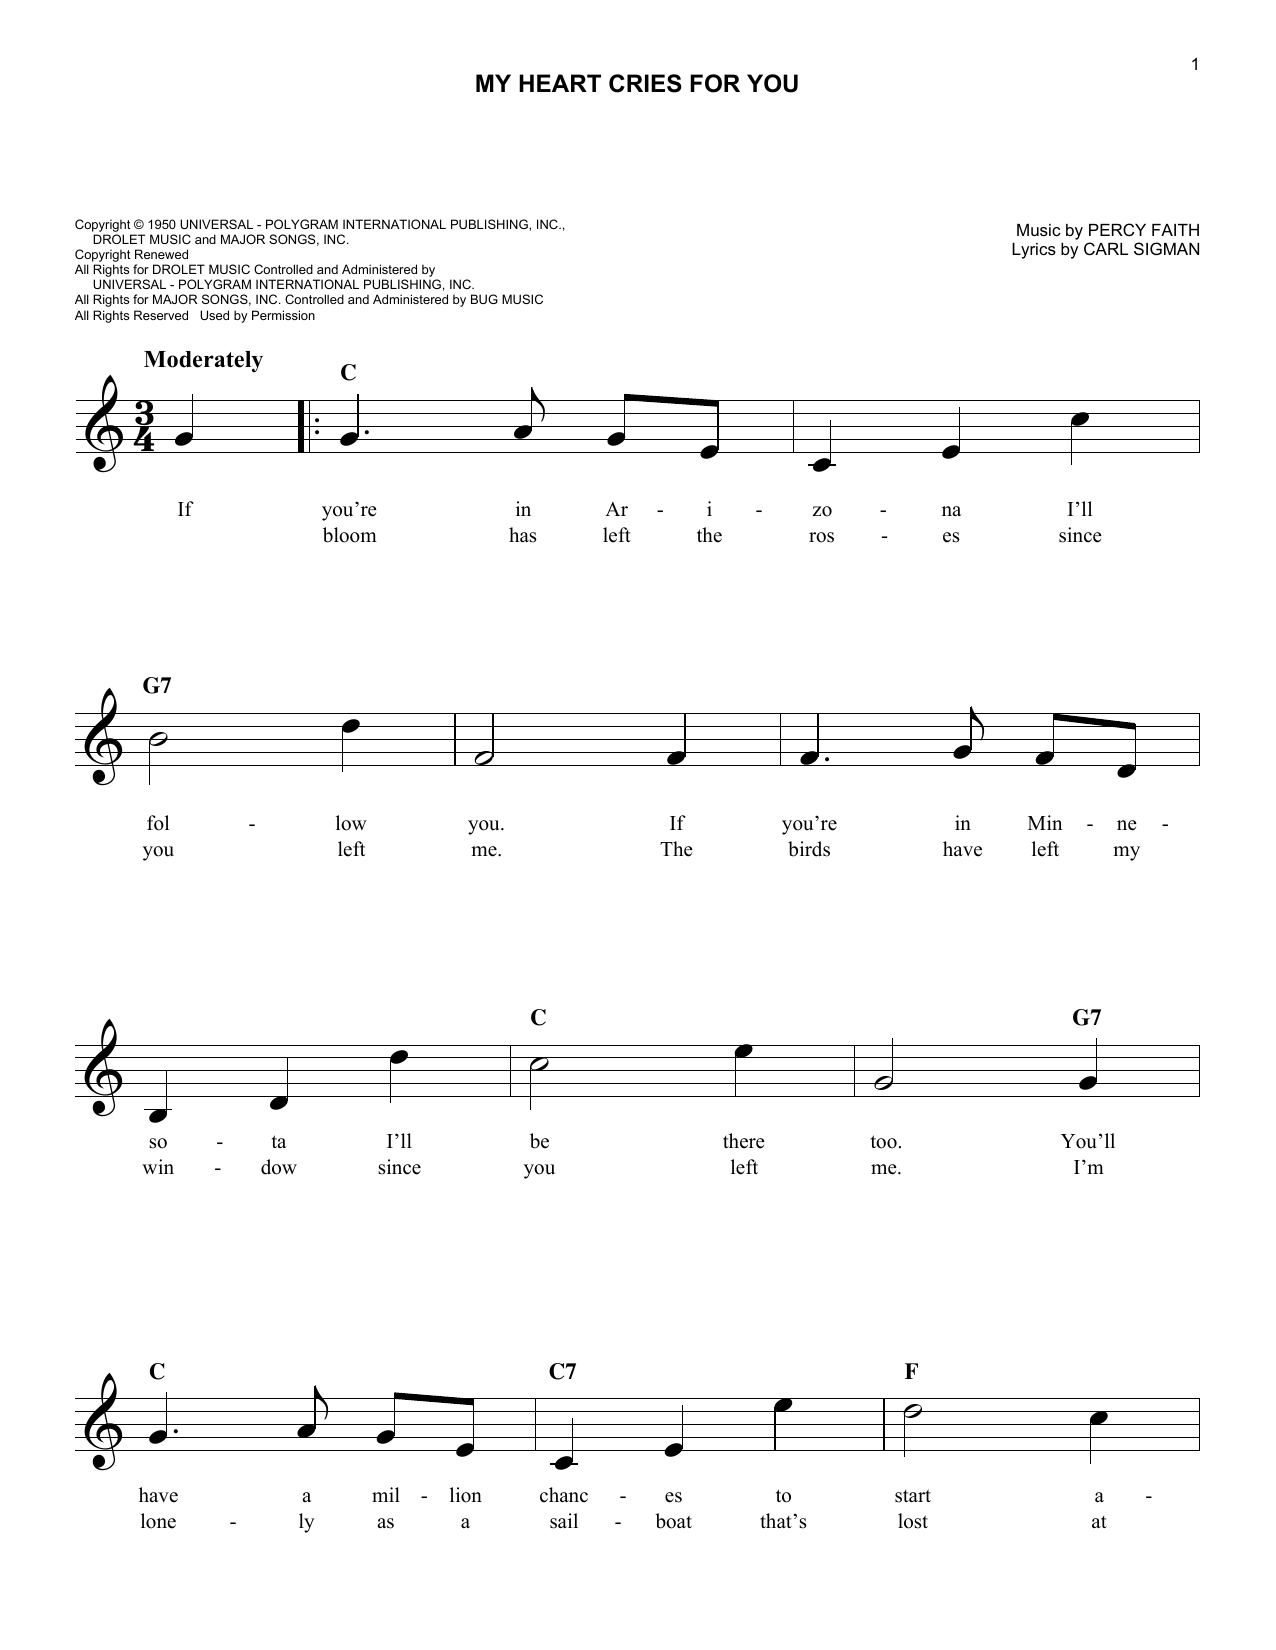 Percy Faith My Heart Cries For You sheet music notes and chords. Download Printable PDF.